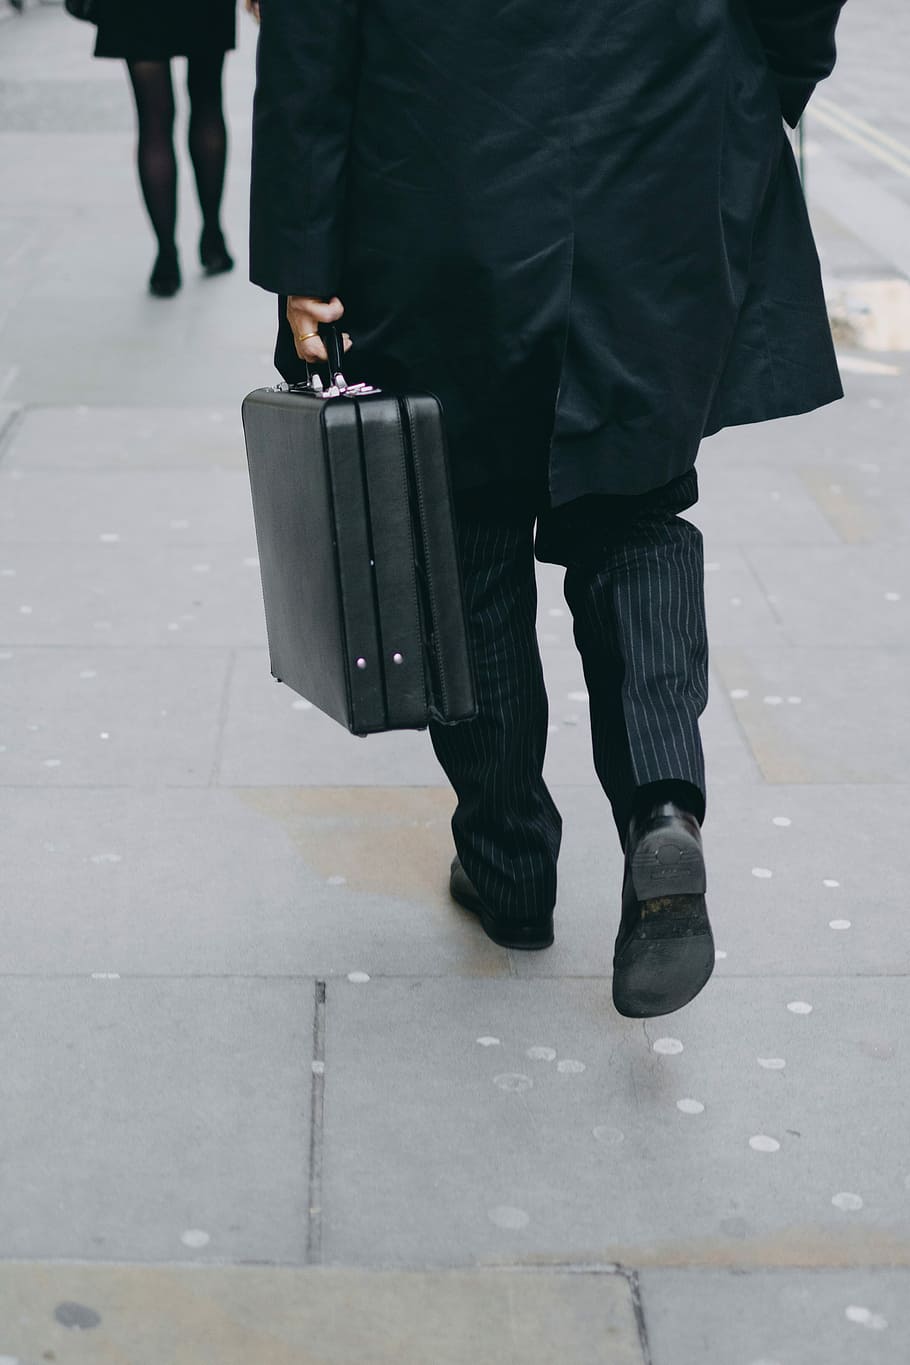 person carrying suit case while walking on pavement, man in black coat and pinstriped pants walking carrying briefcase